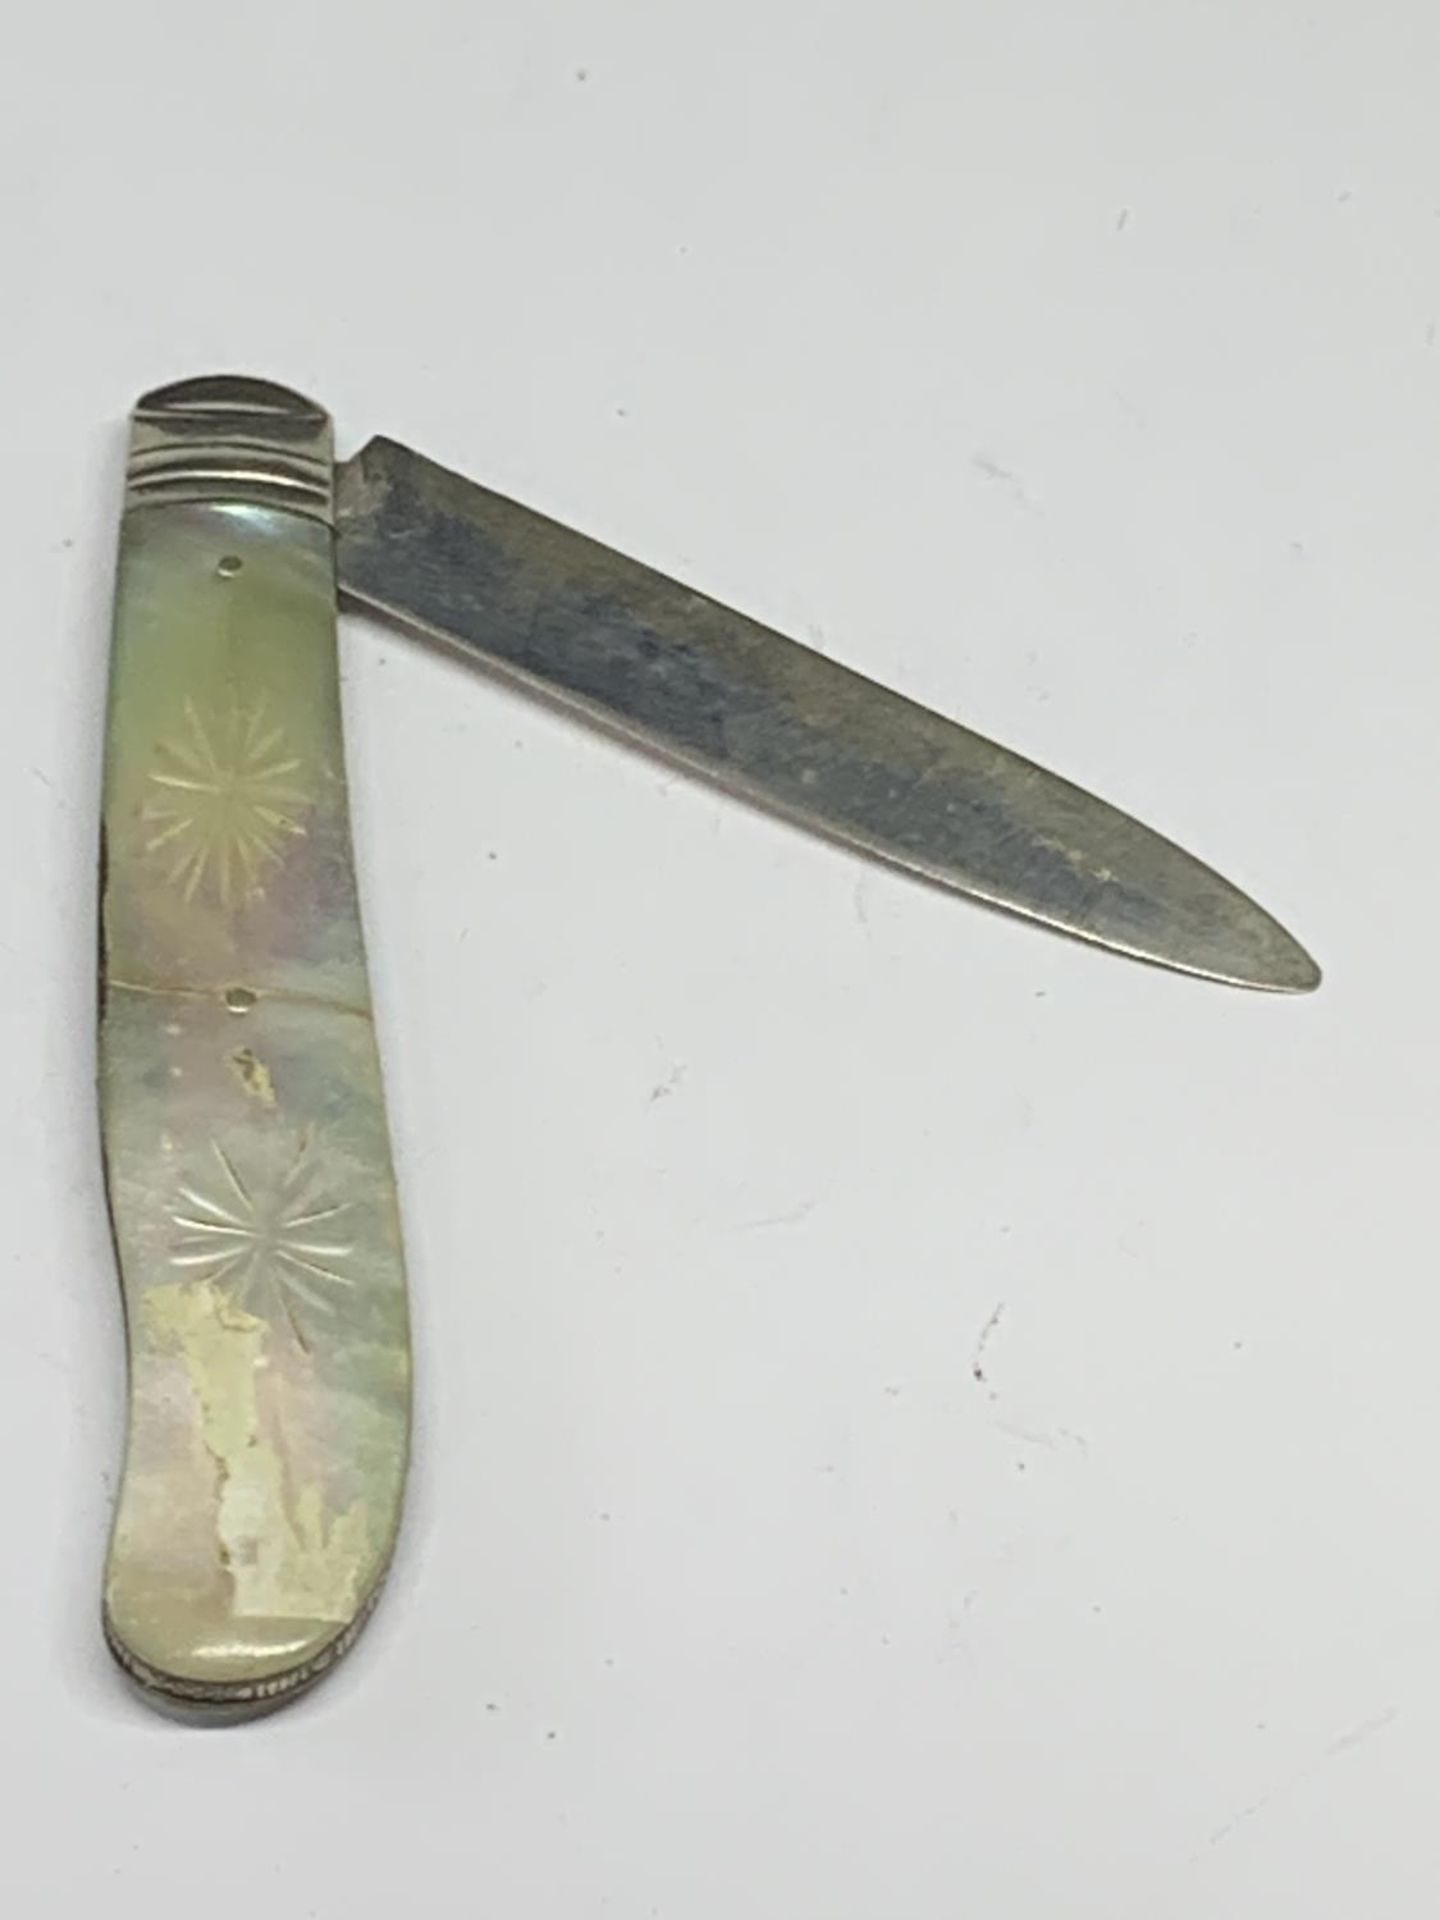 A HALLMARKED SHEFFIELD 1860 FRUIT KNIFE WITH MOTHER OF PEARL HANDLE - Image 3 of 4